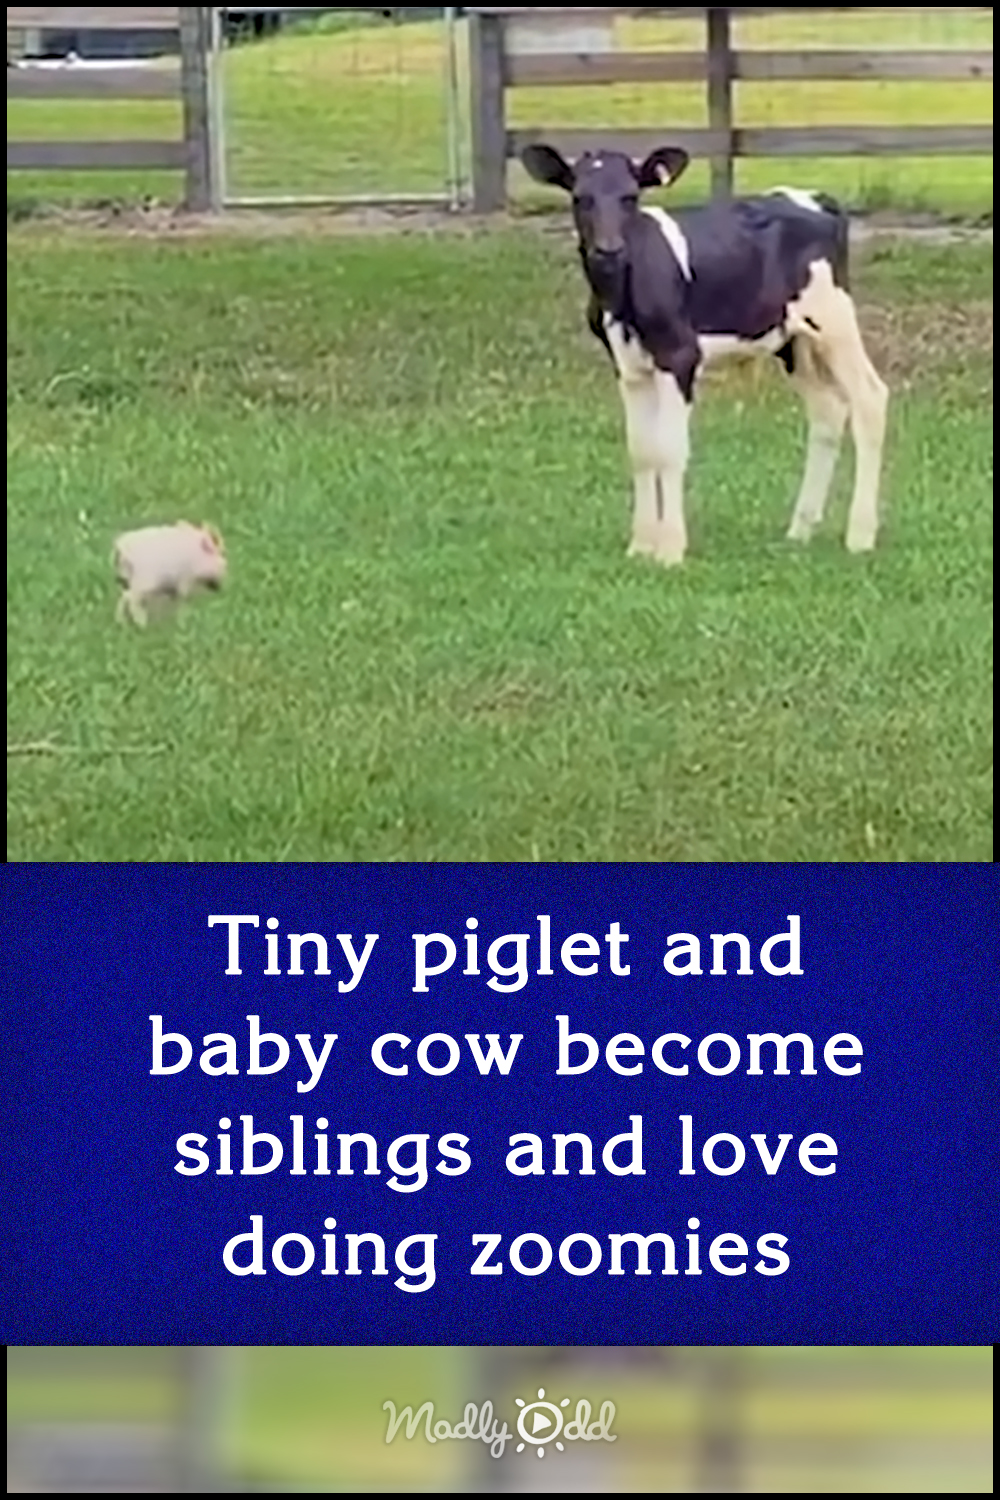 Tiny piglet and baby cow become siblings and love doing zoomies